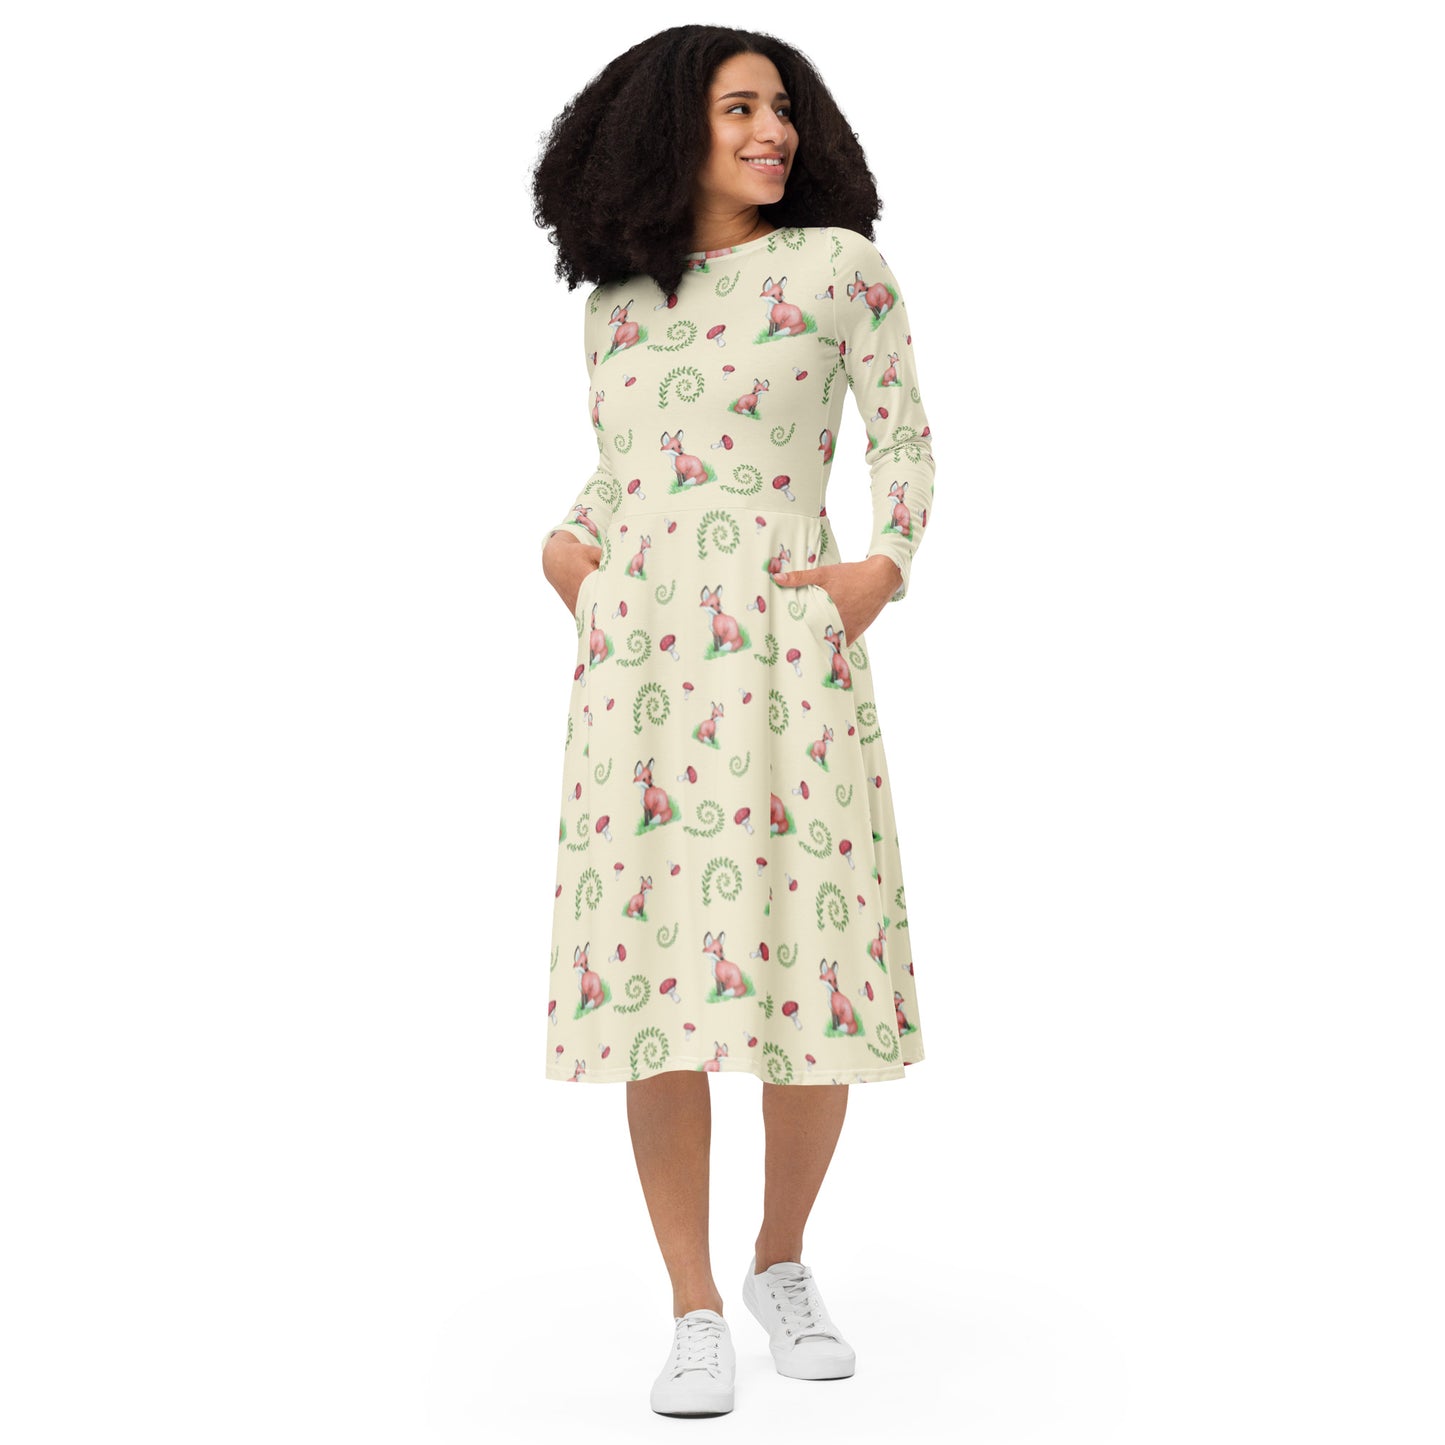 Fox pattern long sleeve midi dress with side pockets, fitted waist, and flared bottom. Foxes, ferns, and mushrooms are patterned on the apricot white fabric. Soft and comfortable. Front view on female model.